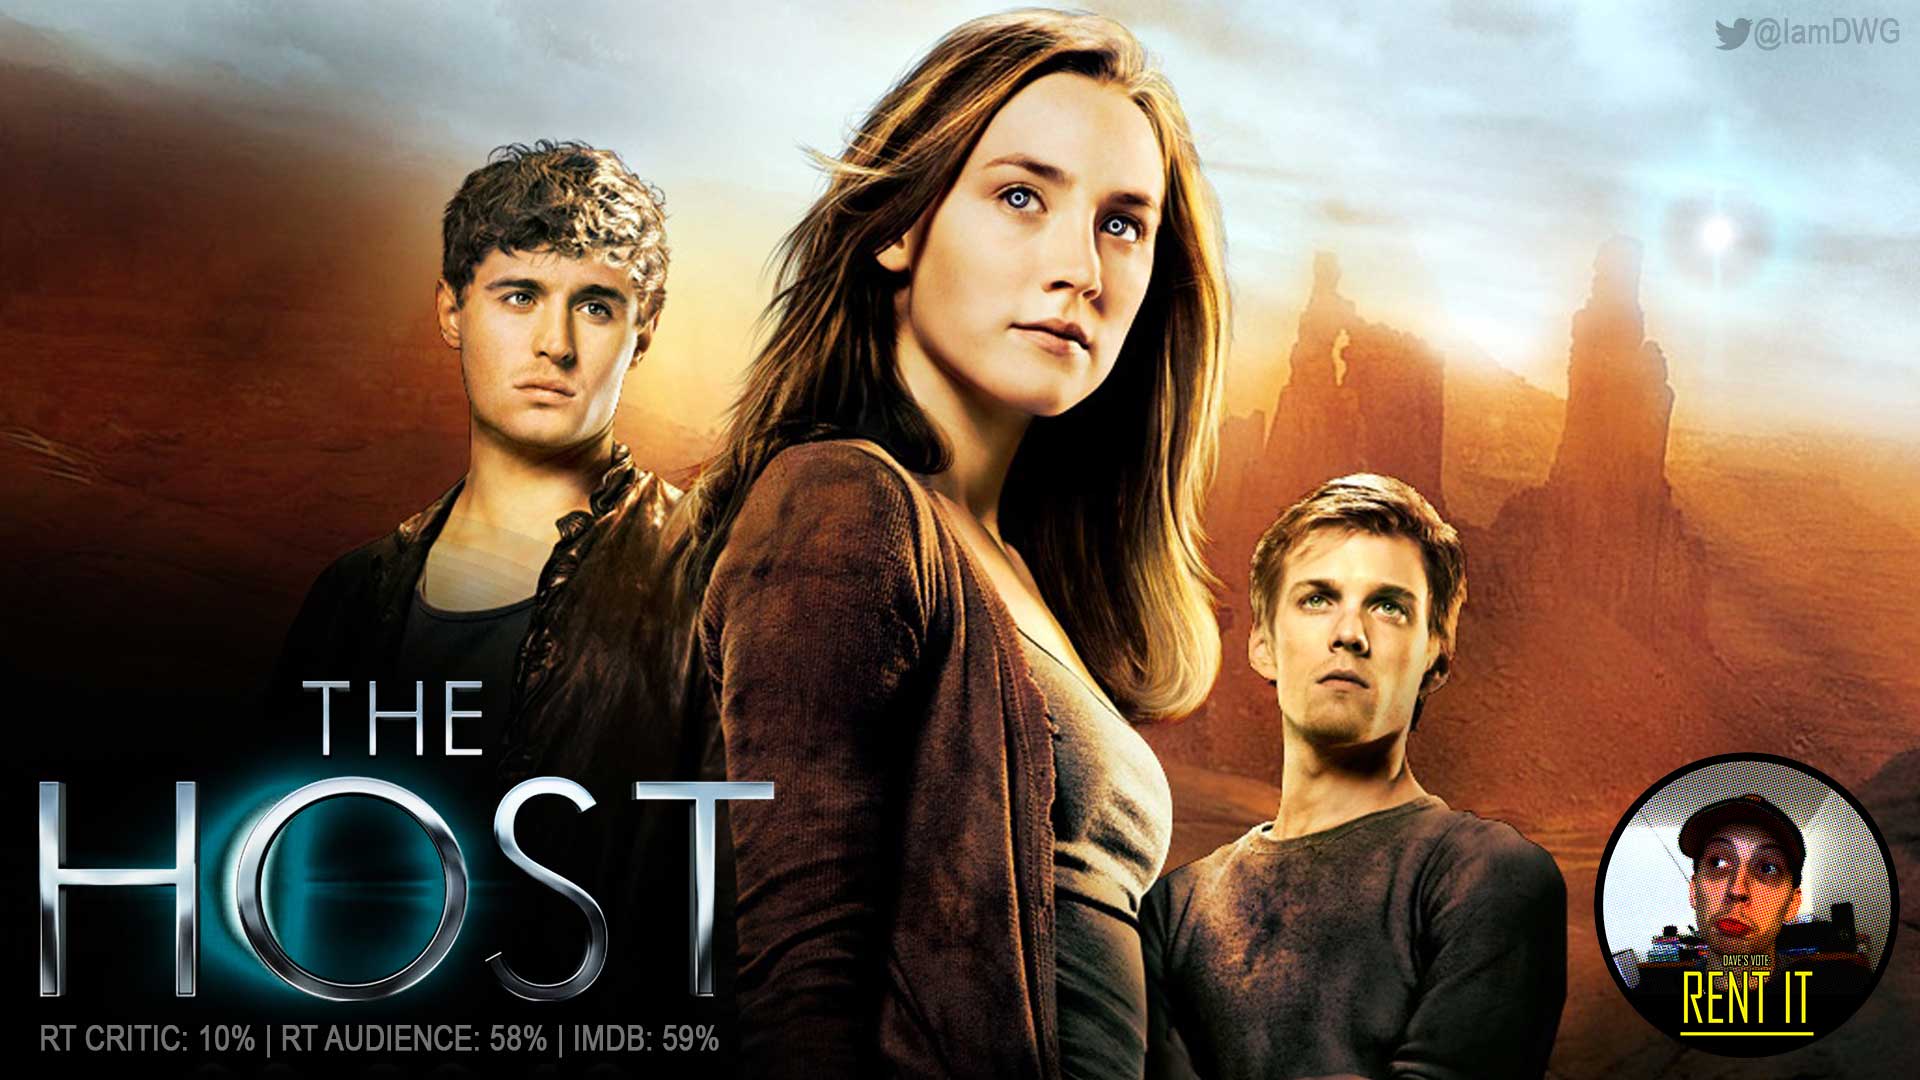 The Host (2013) wallpaper, Movie, HQ The Host (2013) picture